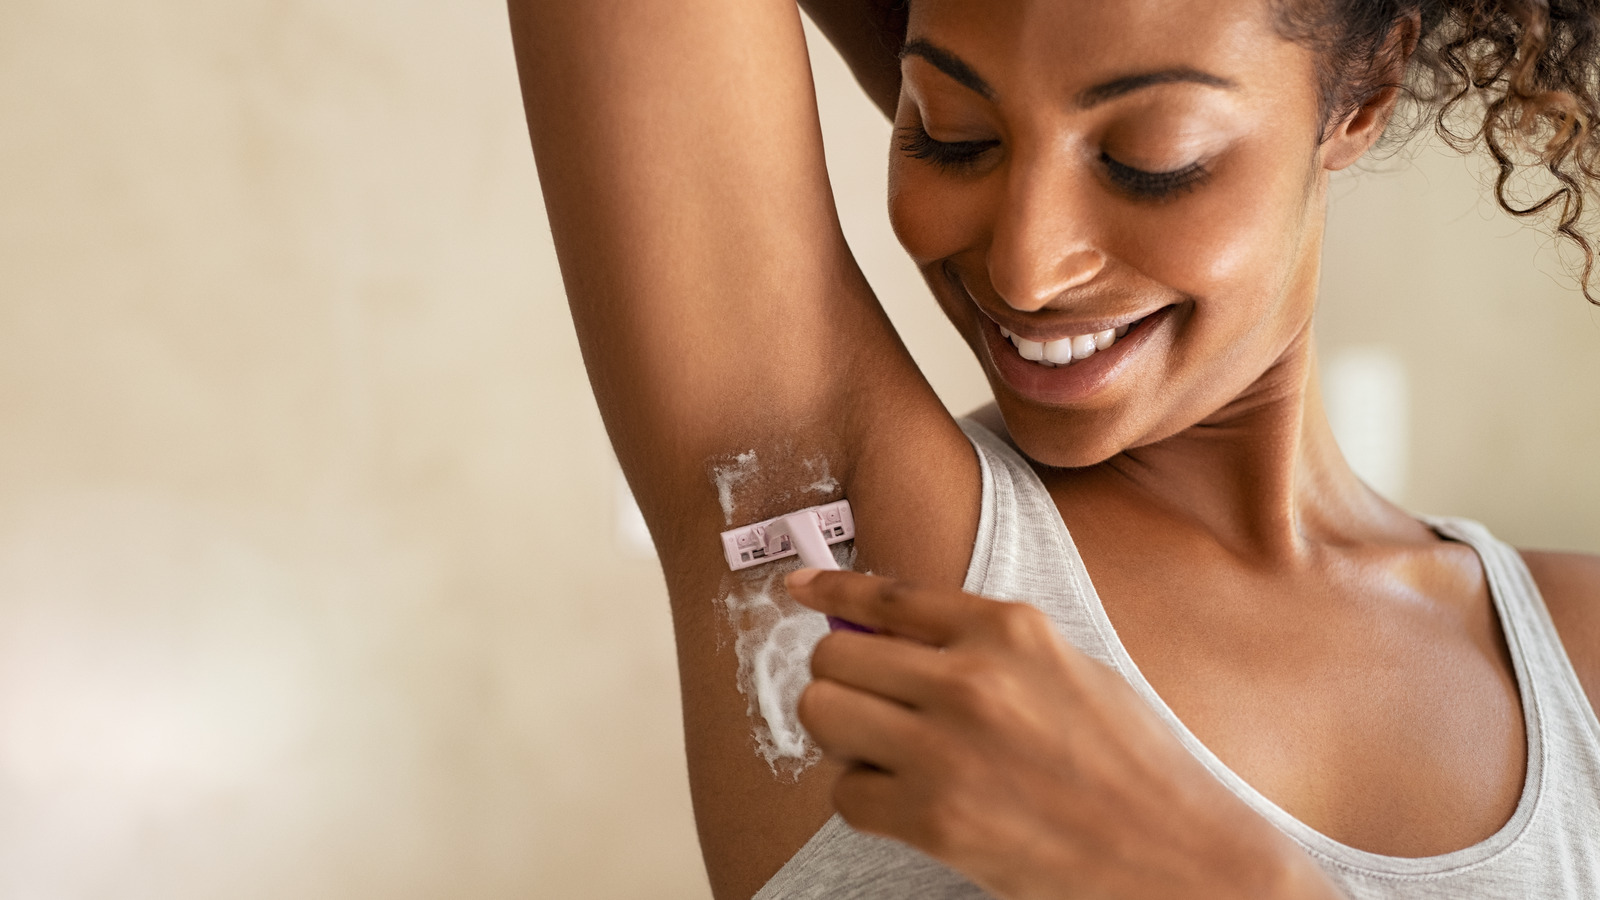 Here's Why You Should Stop Shaving Under Your Arms